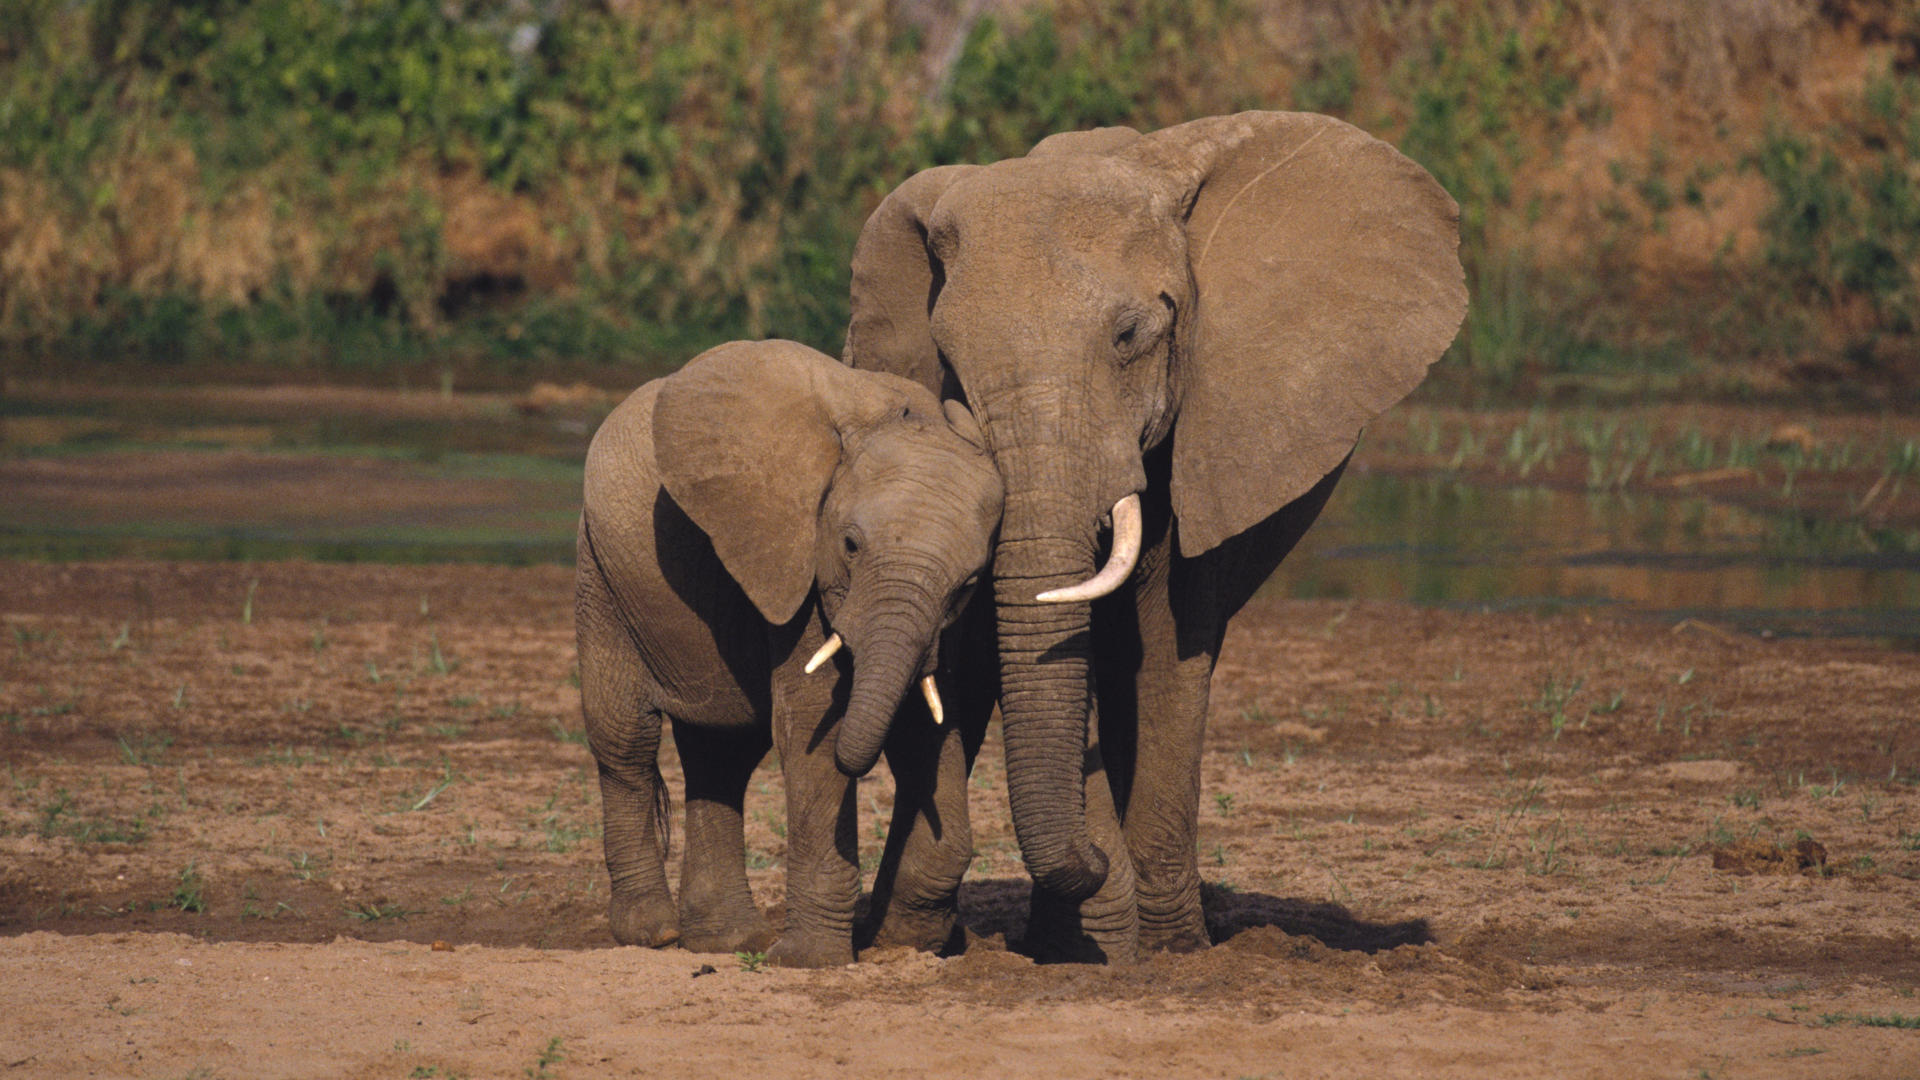 Time running out for wild elephants say experts – NEW POWER